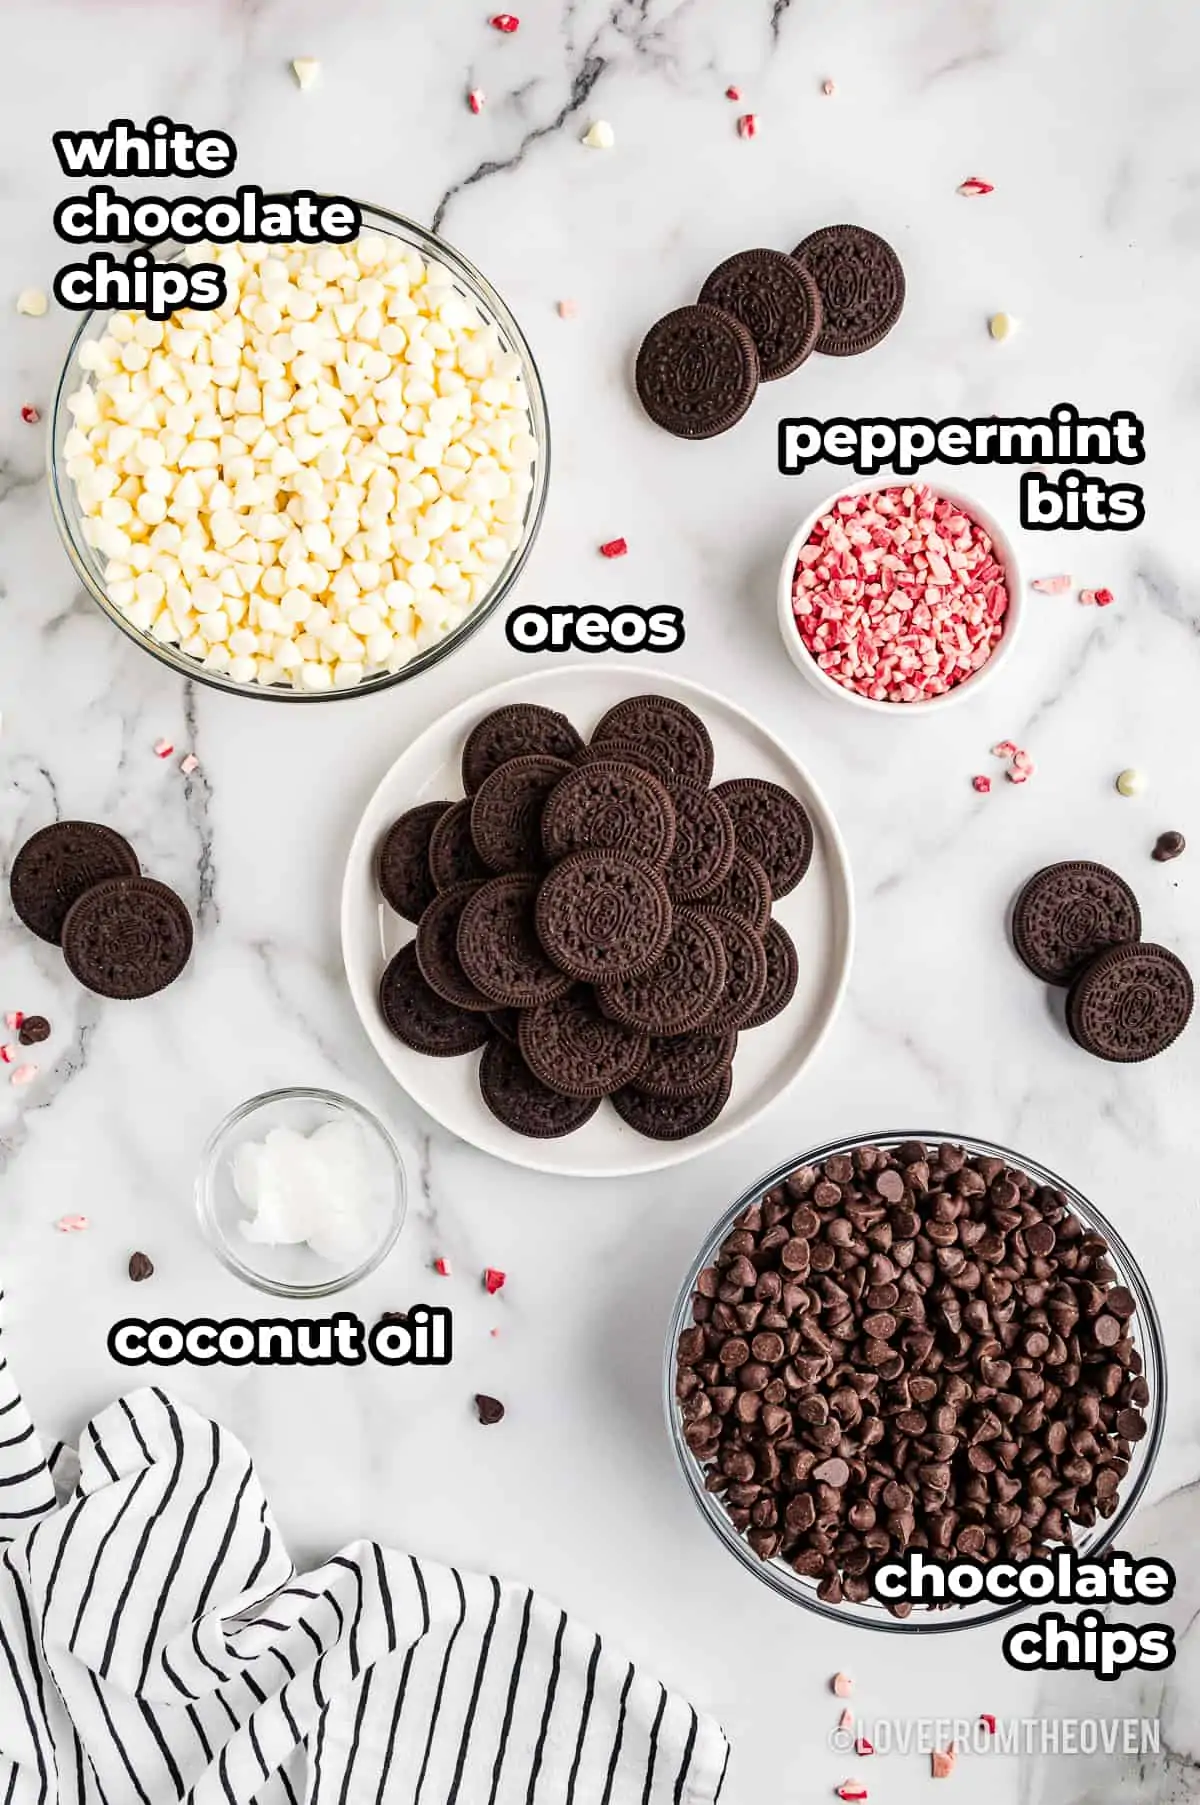 Ingredients for peppermint bark with Oreos